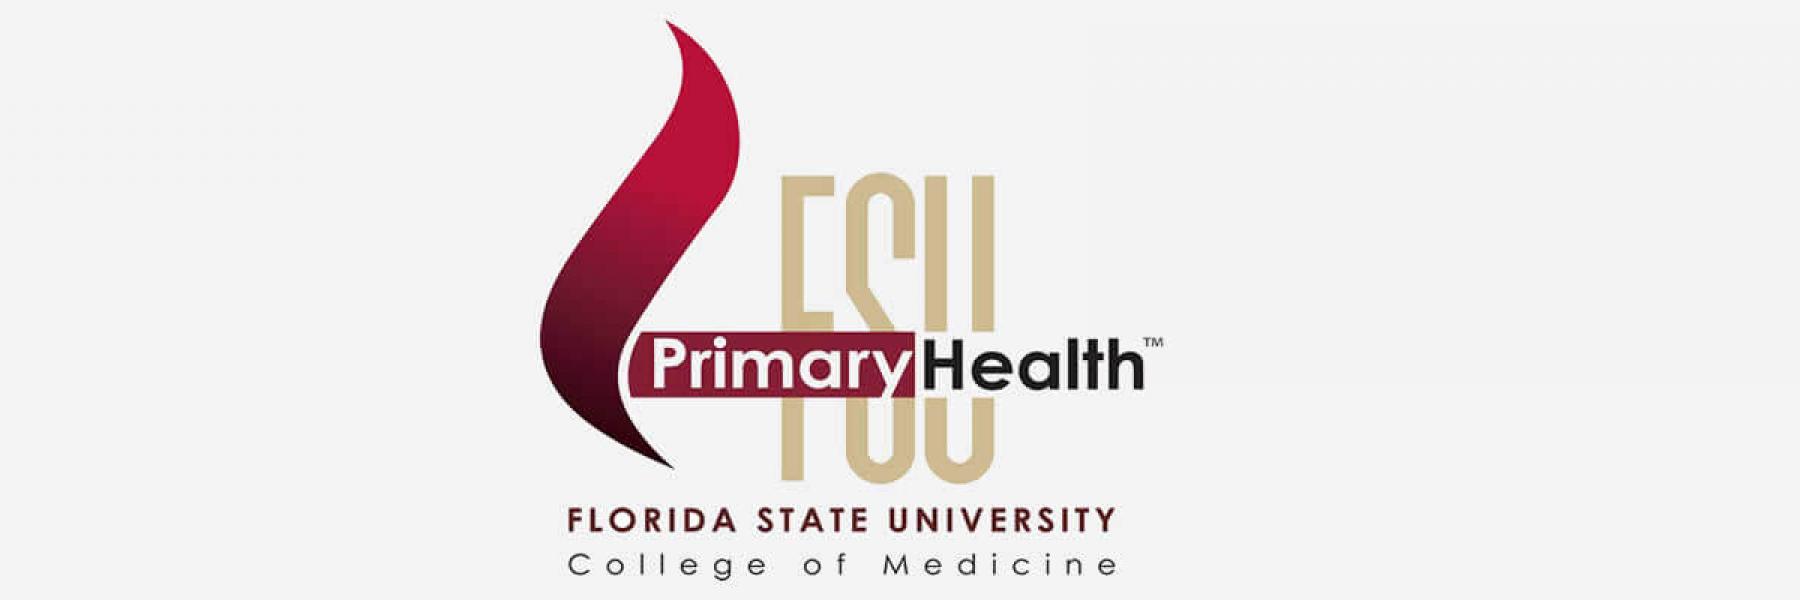 FSU PrimaryHealth logo, featuring the university's torch and maroon and gold colors.